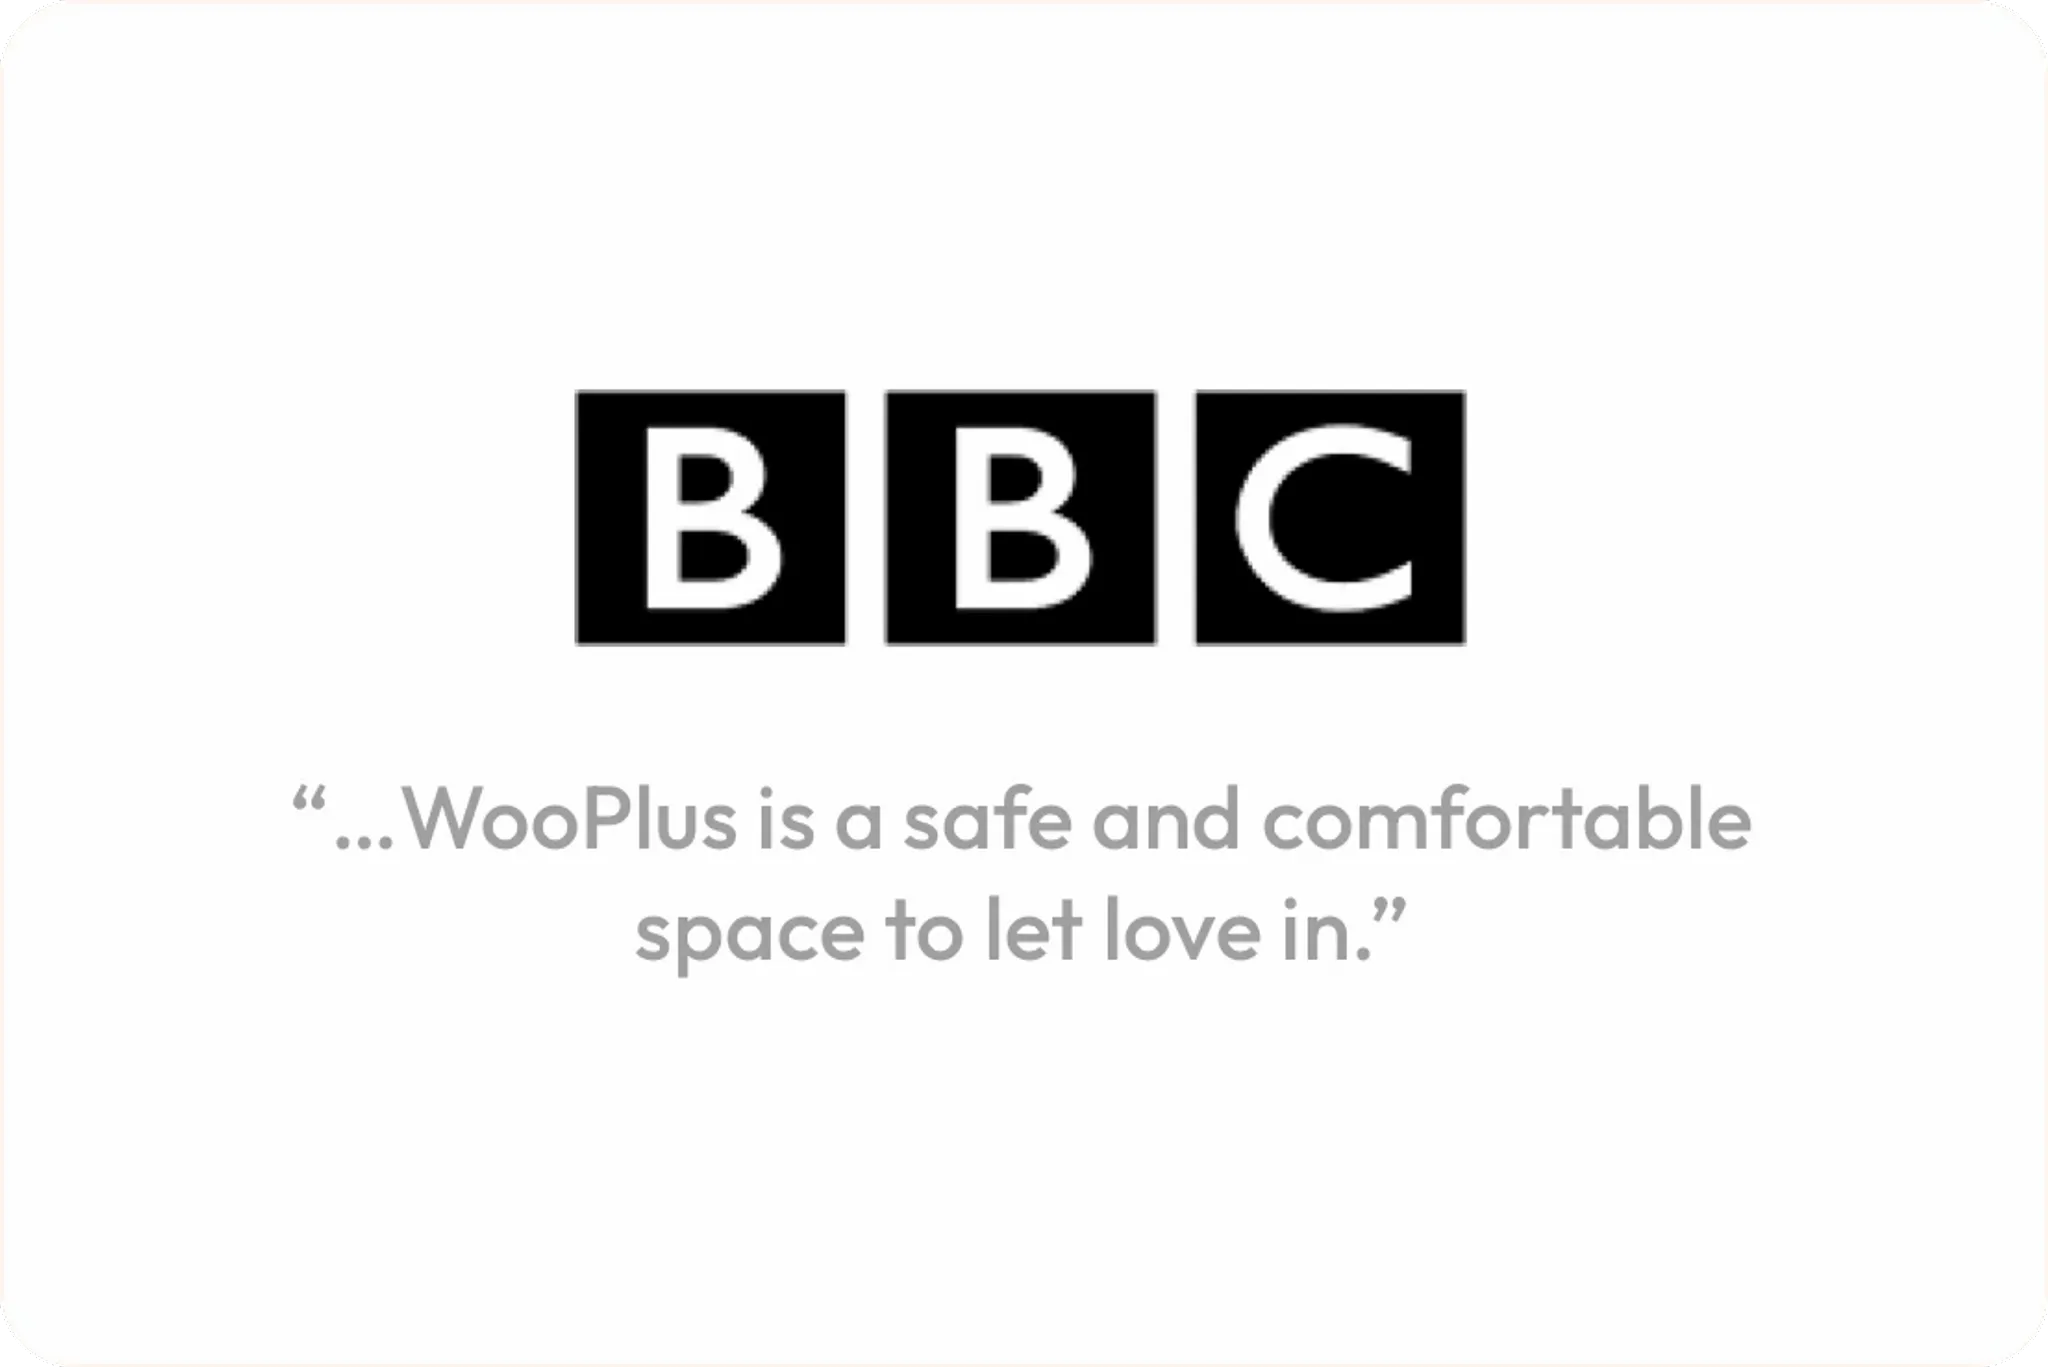 http://www.bbc.co.uk/newsbeat/article/35380162/new-dating-app-wooplus-aims-to-be-tinder-for-plus-size-people